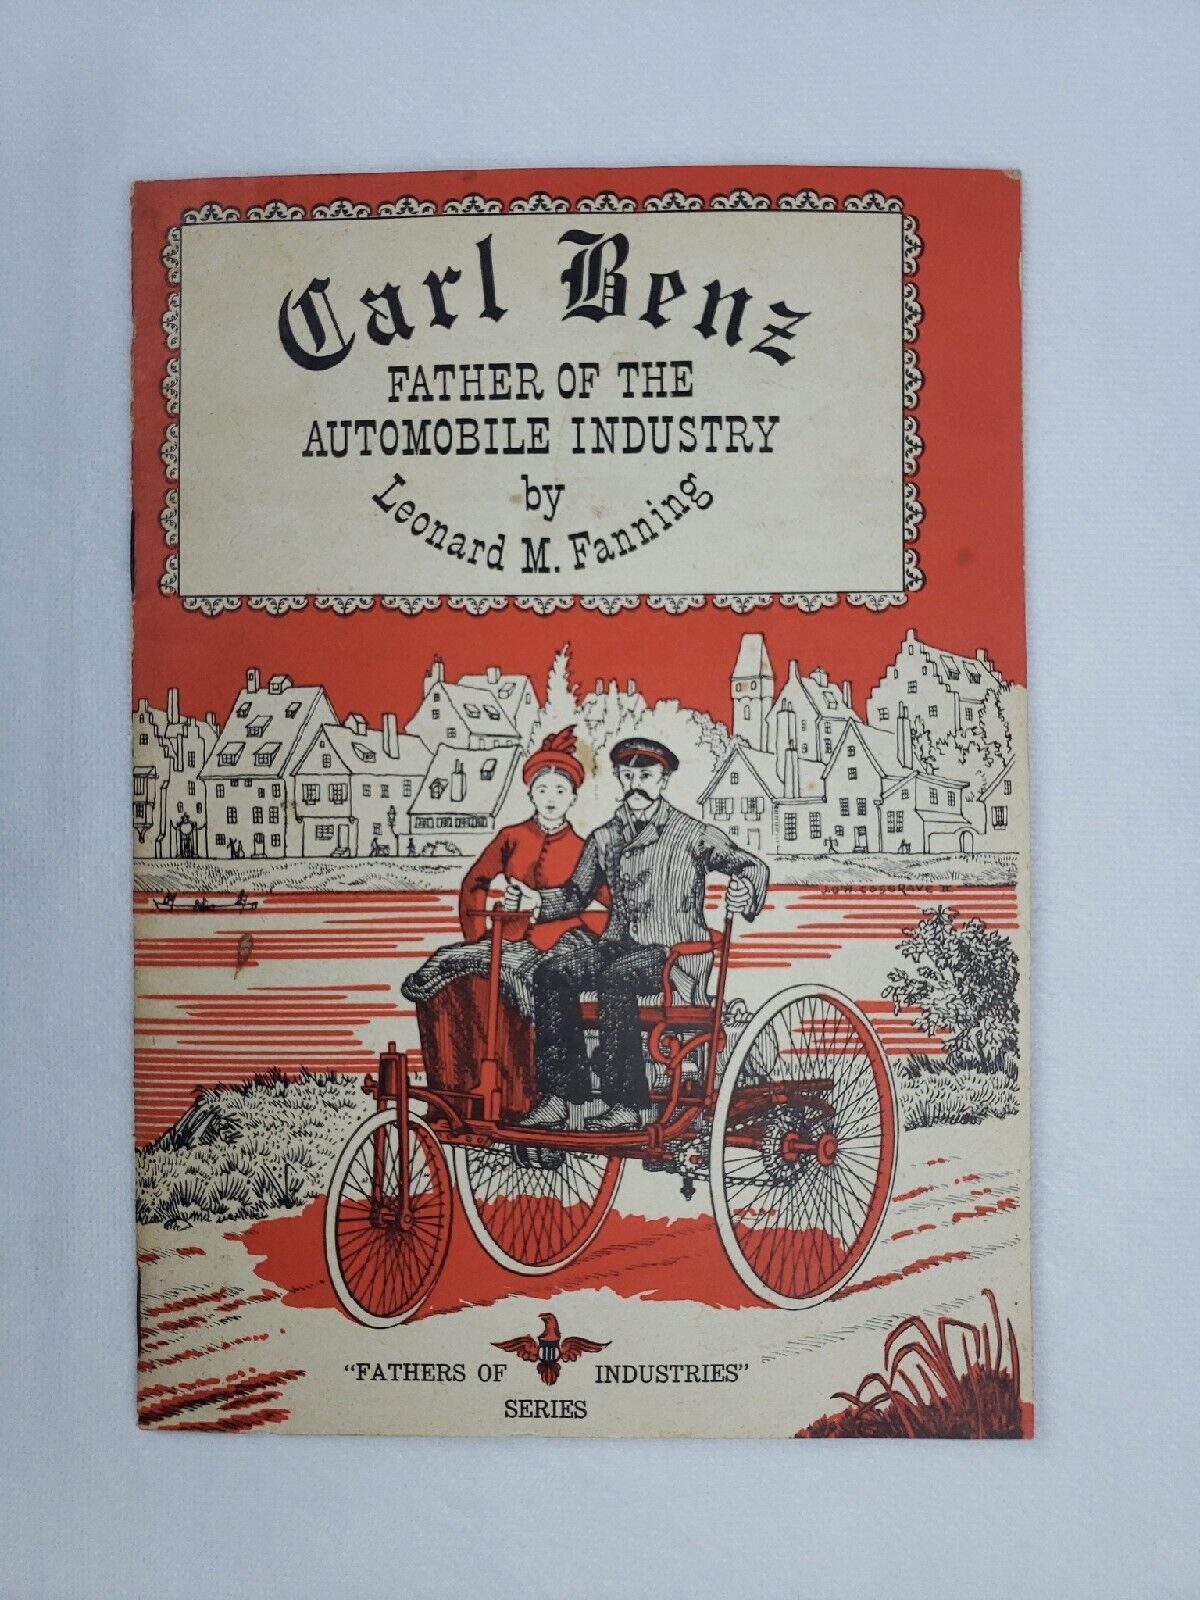 Vintage - Carl Benz Father Of the Automobile Industry Pamphlet- Leonard Fanning